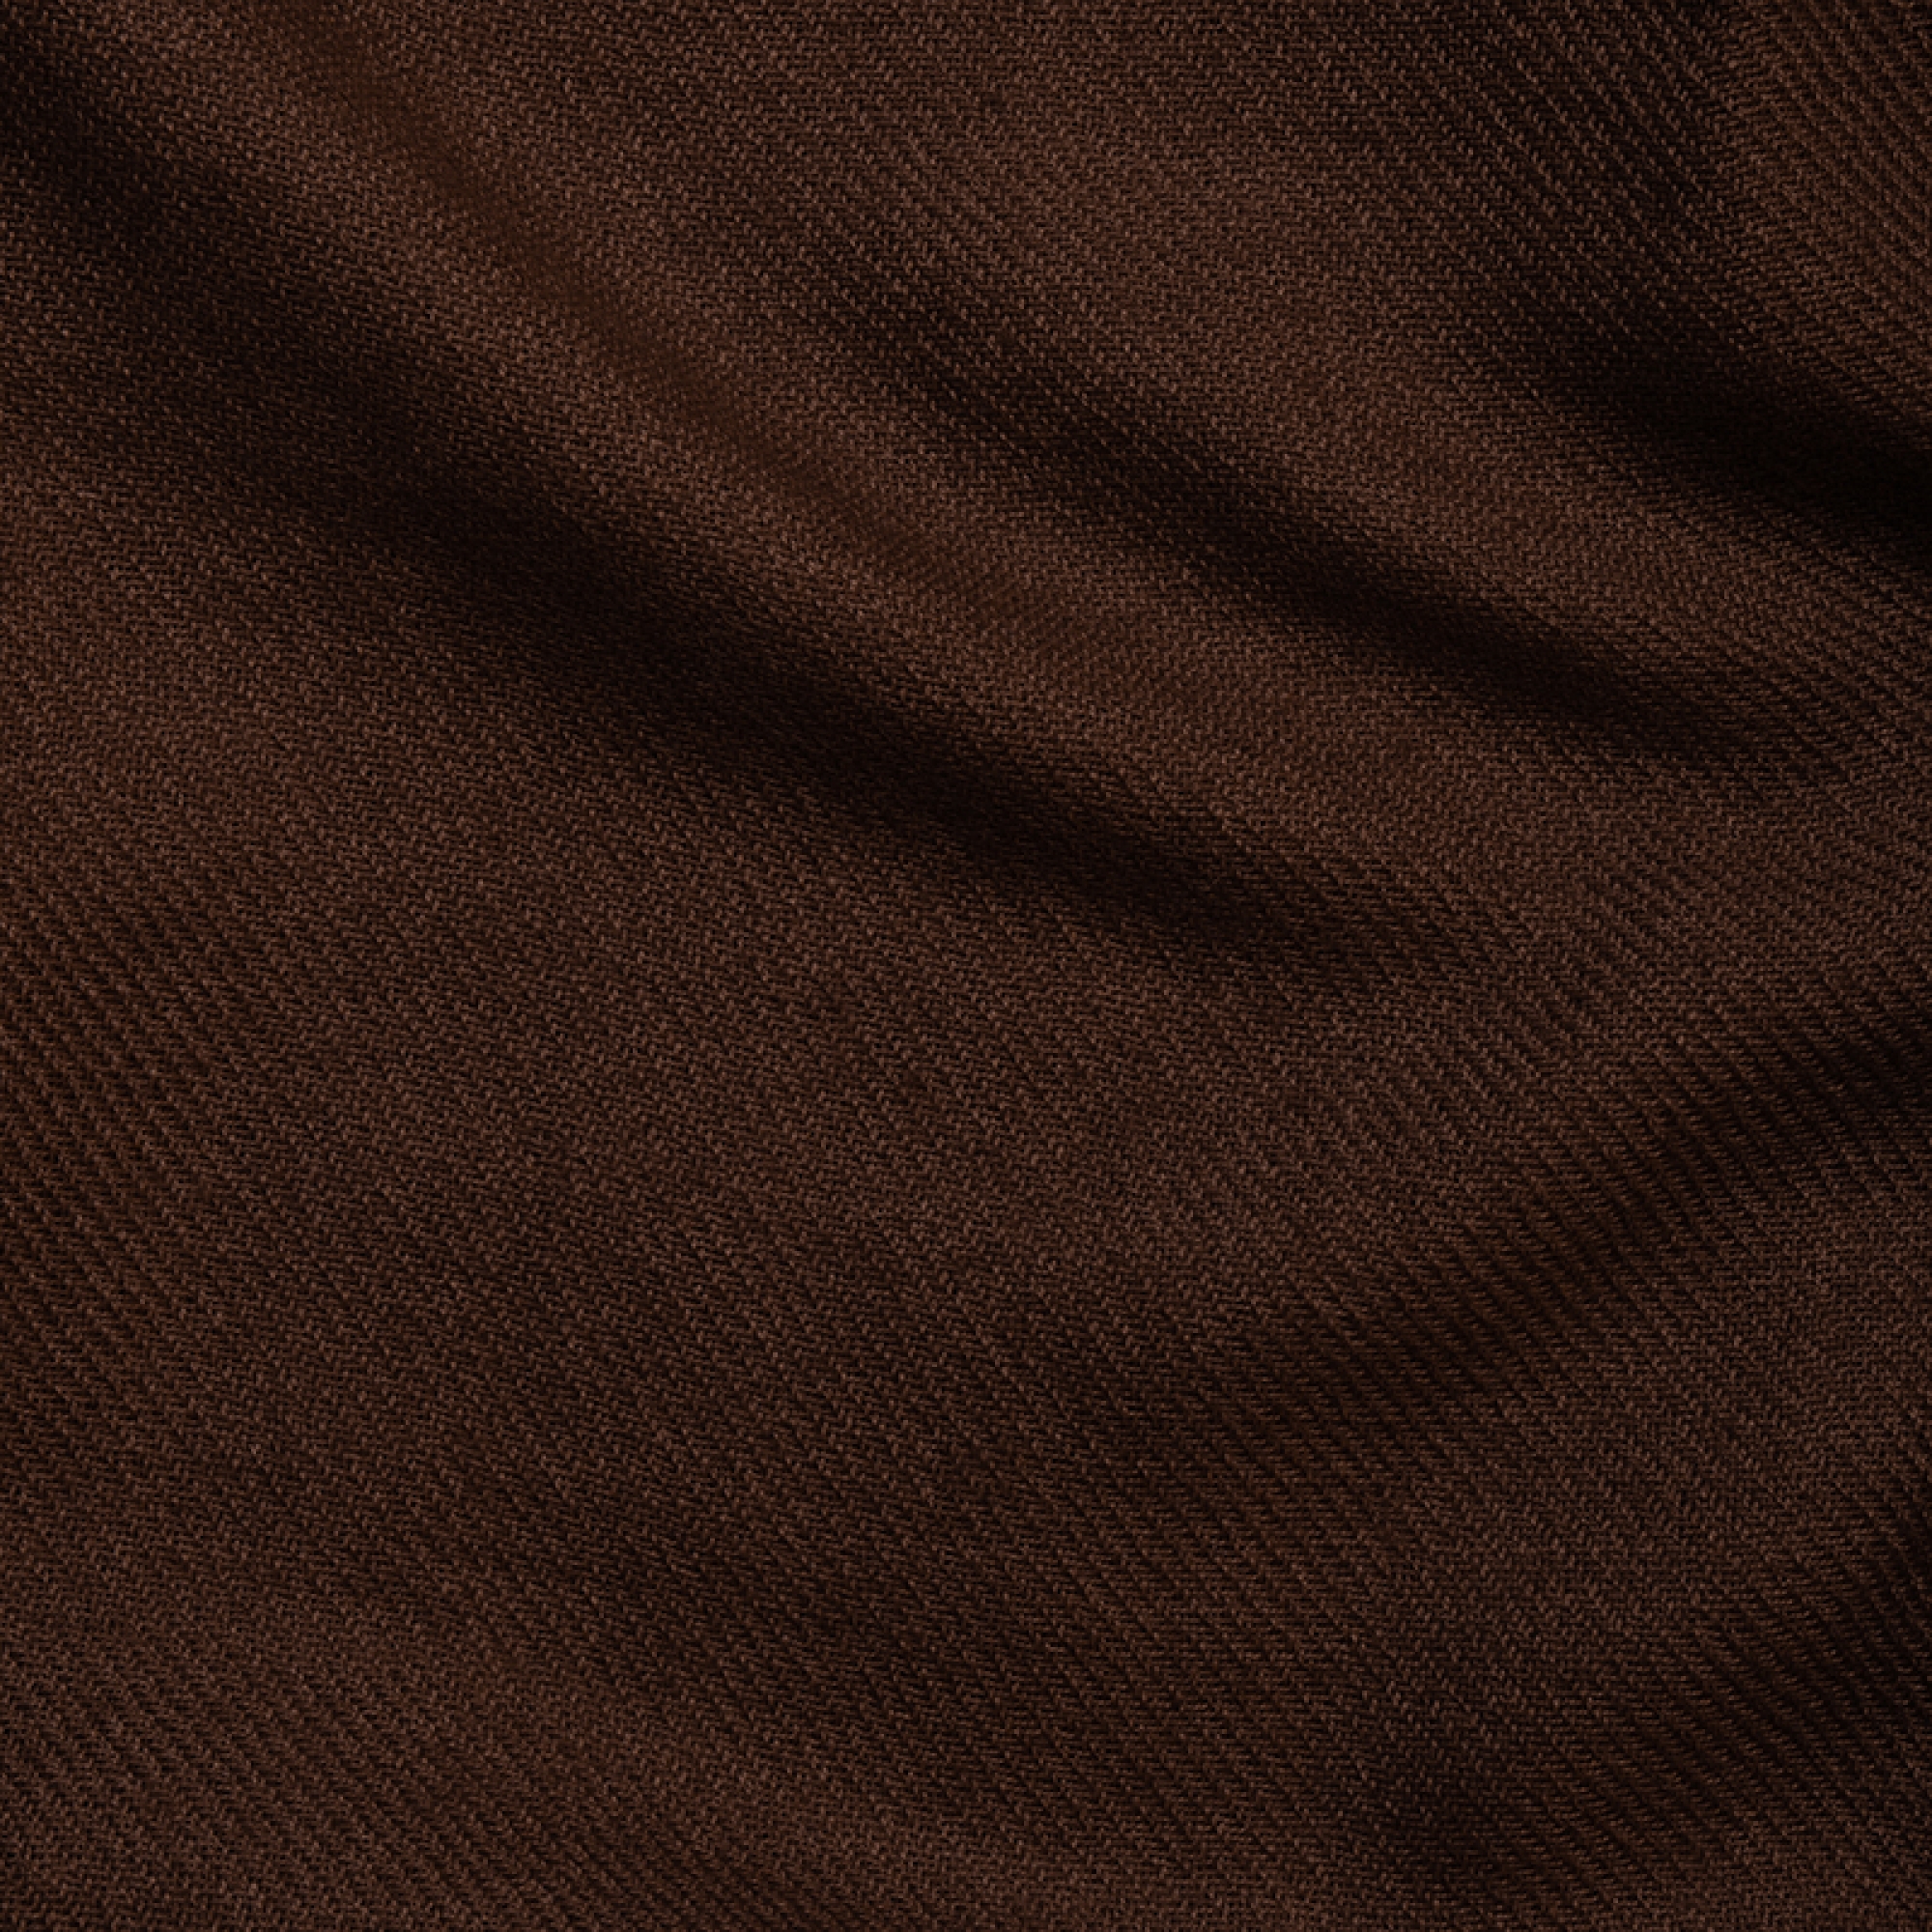 Cashmere cashmere donna cocooning toodoo plain l 220 x 220 cacao 220x220cm